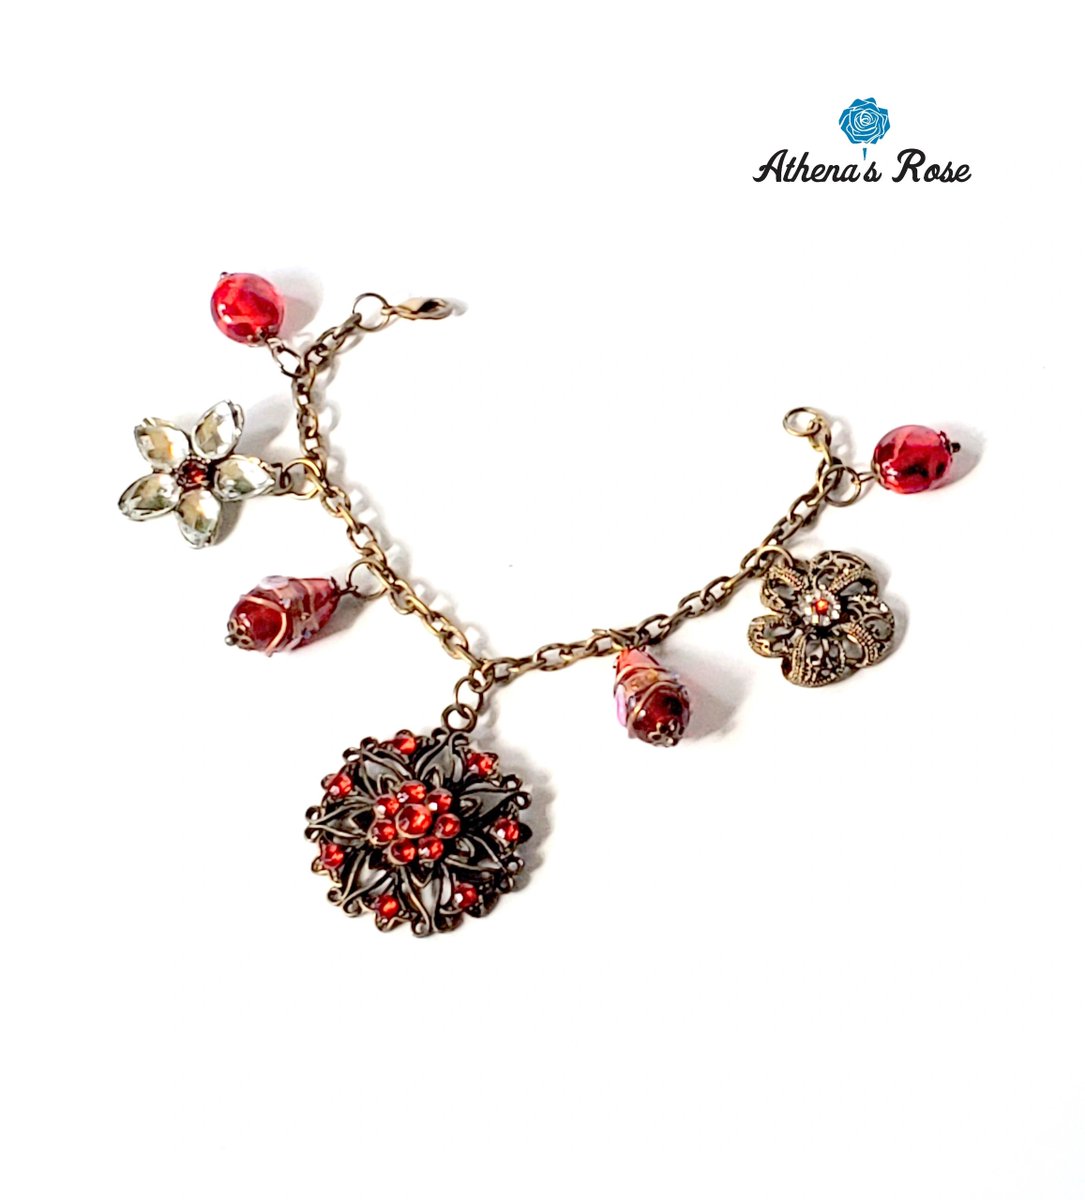 Spotlight of the Day: Red Mid-Century Style Retro Charm Bracelet

*For exclusive coupons, updates, and more, please sign up for our mailing list at AthenasRose.com.

#bracelets #handmadejewelry #charmbracelets  #etsyshop #jewelryboutique #charms #moda  #trendy #bijoux